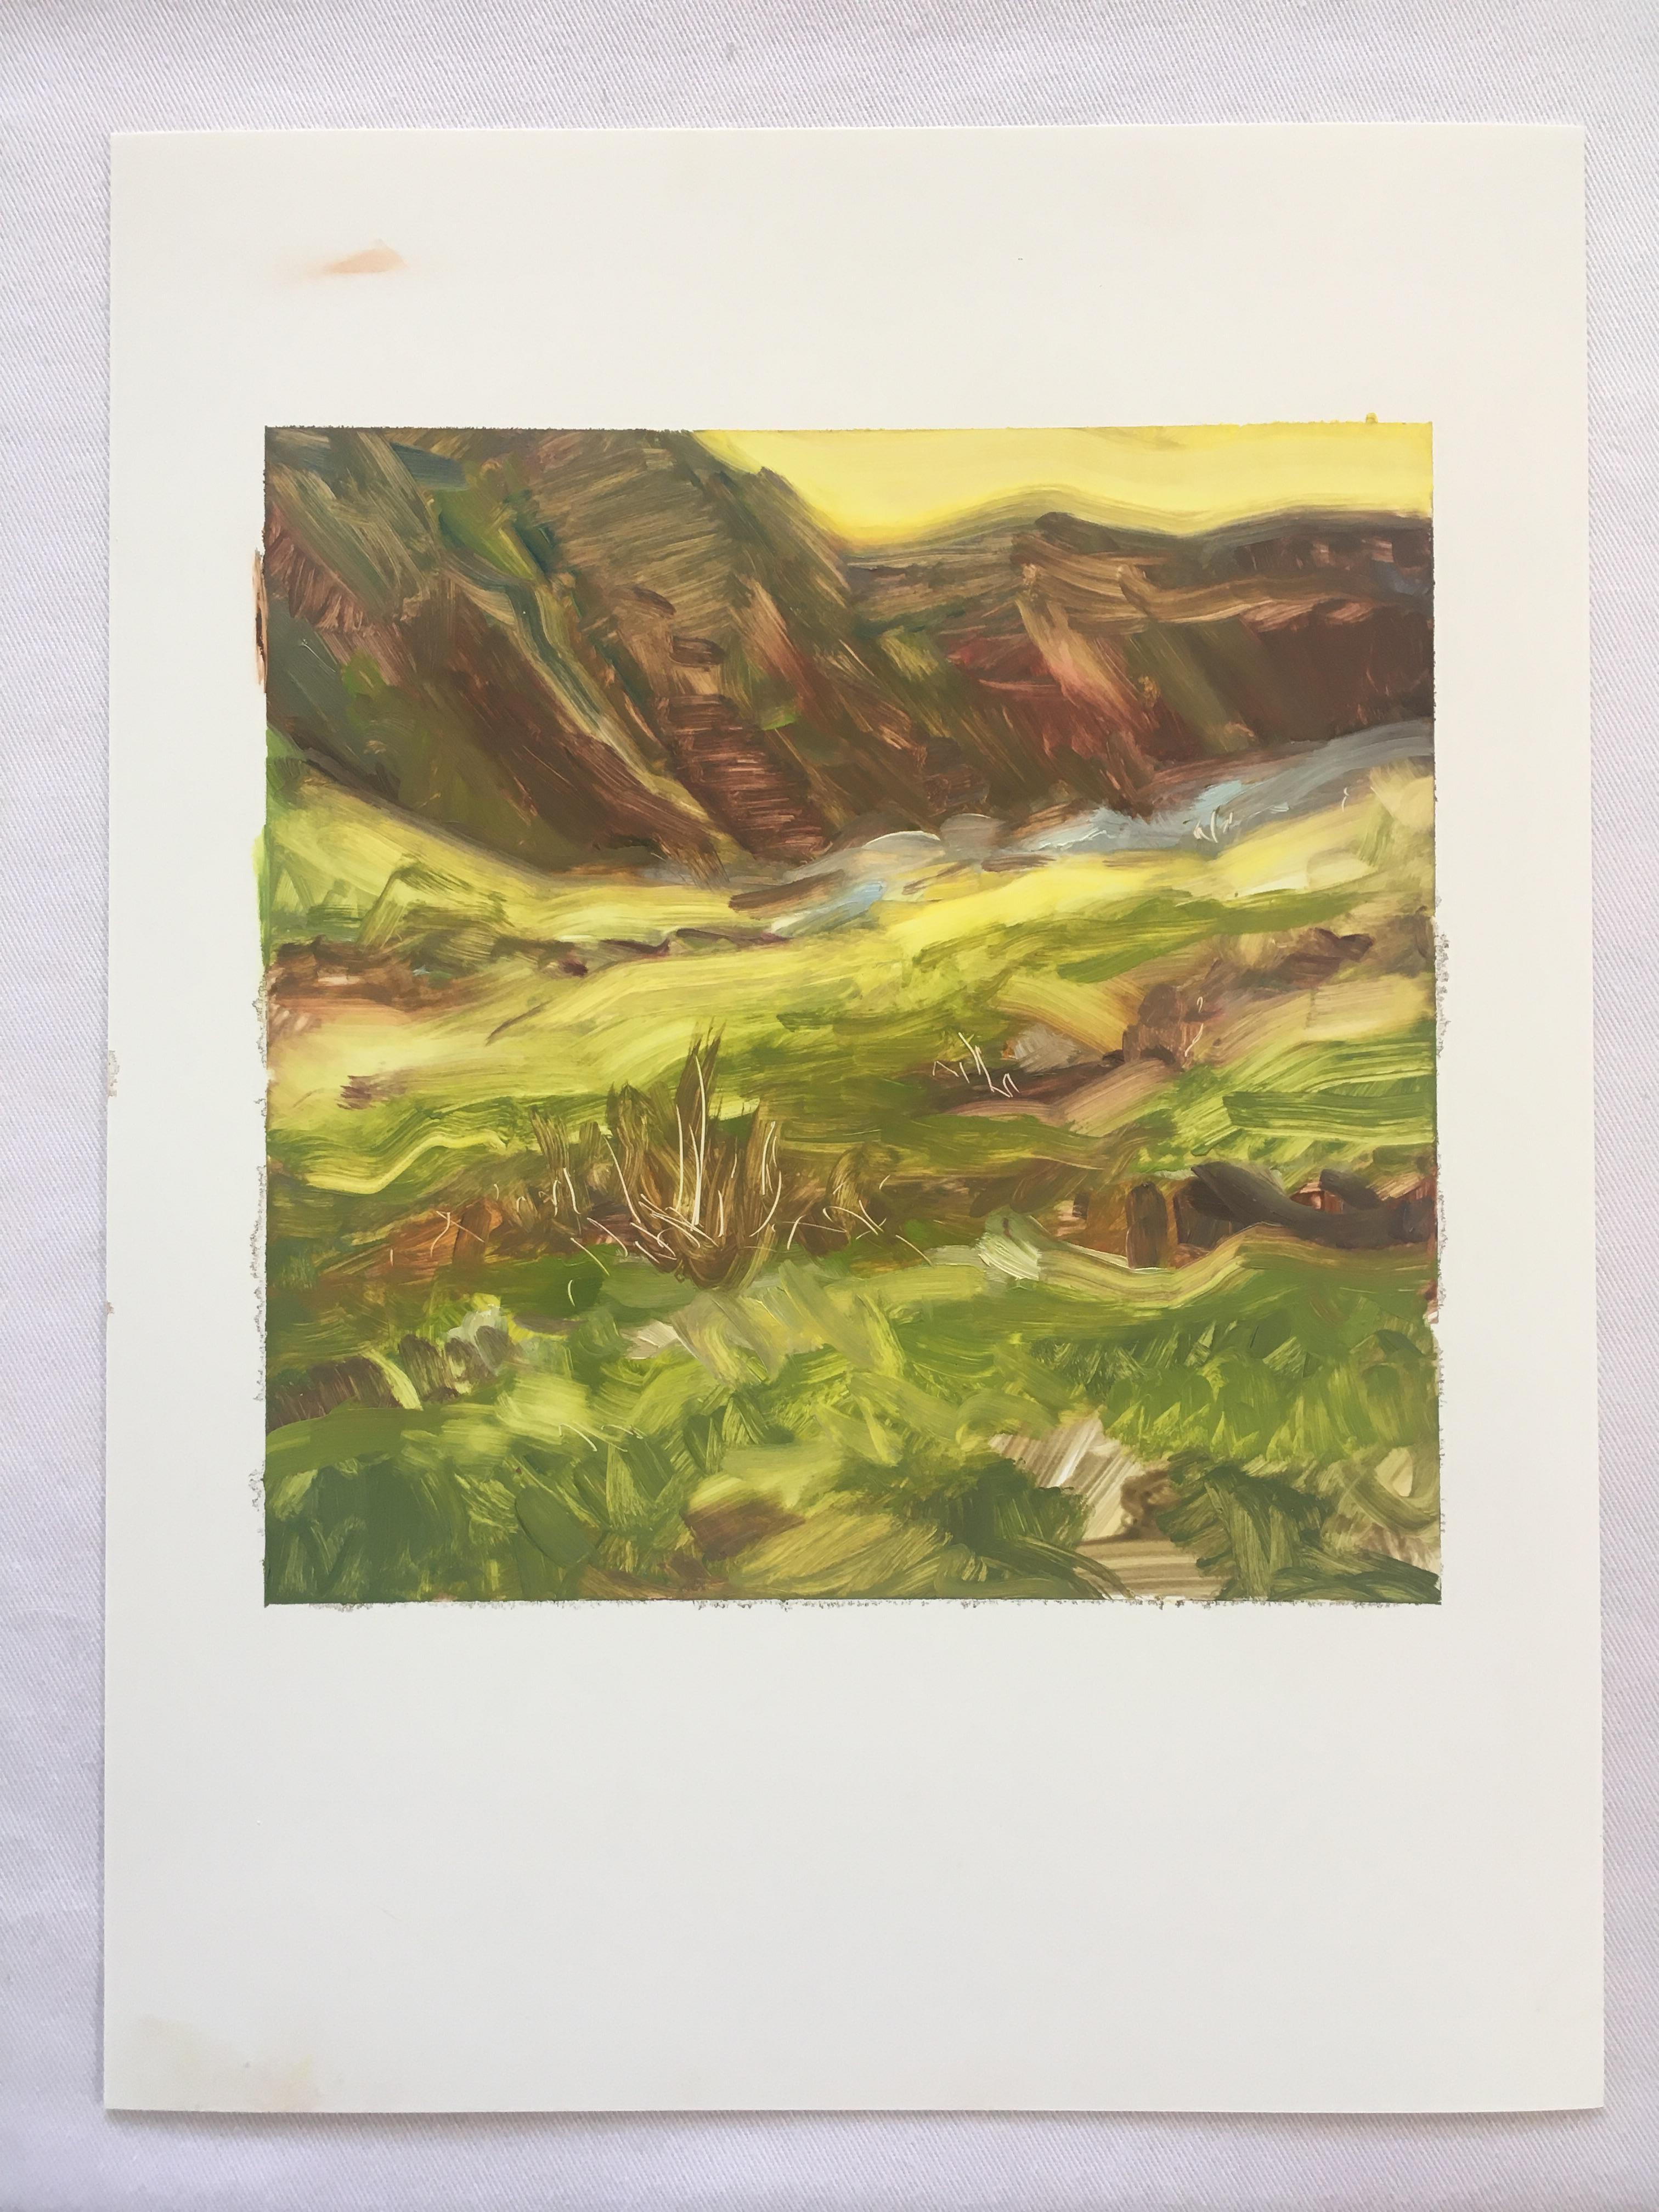 PASTURE Landscape Painting - Meadow and Spring - Warm Tones - Oil on Yupo Paper For Sale 1